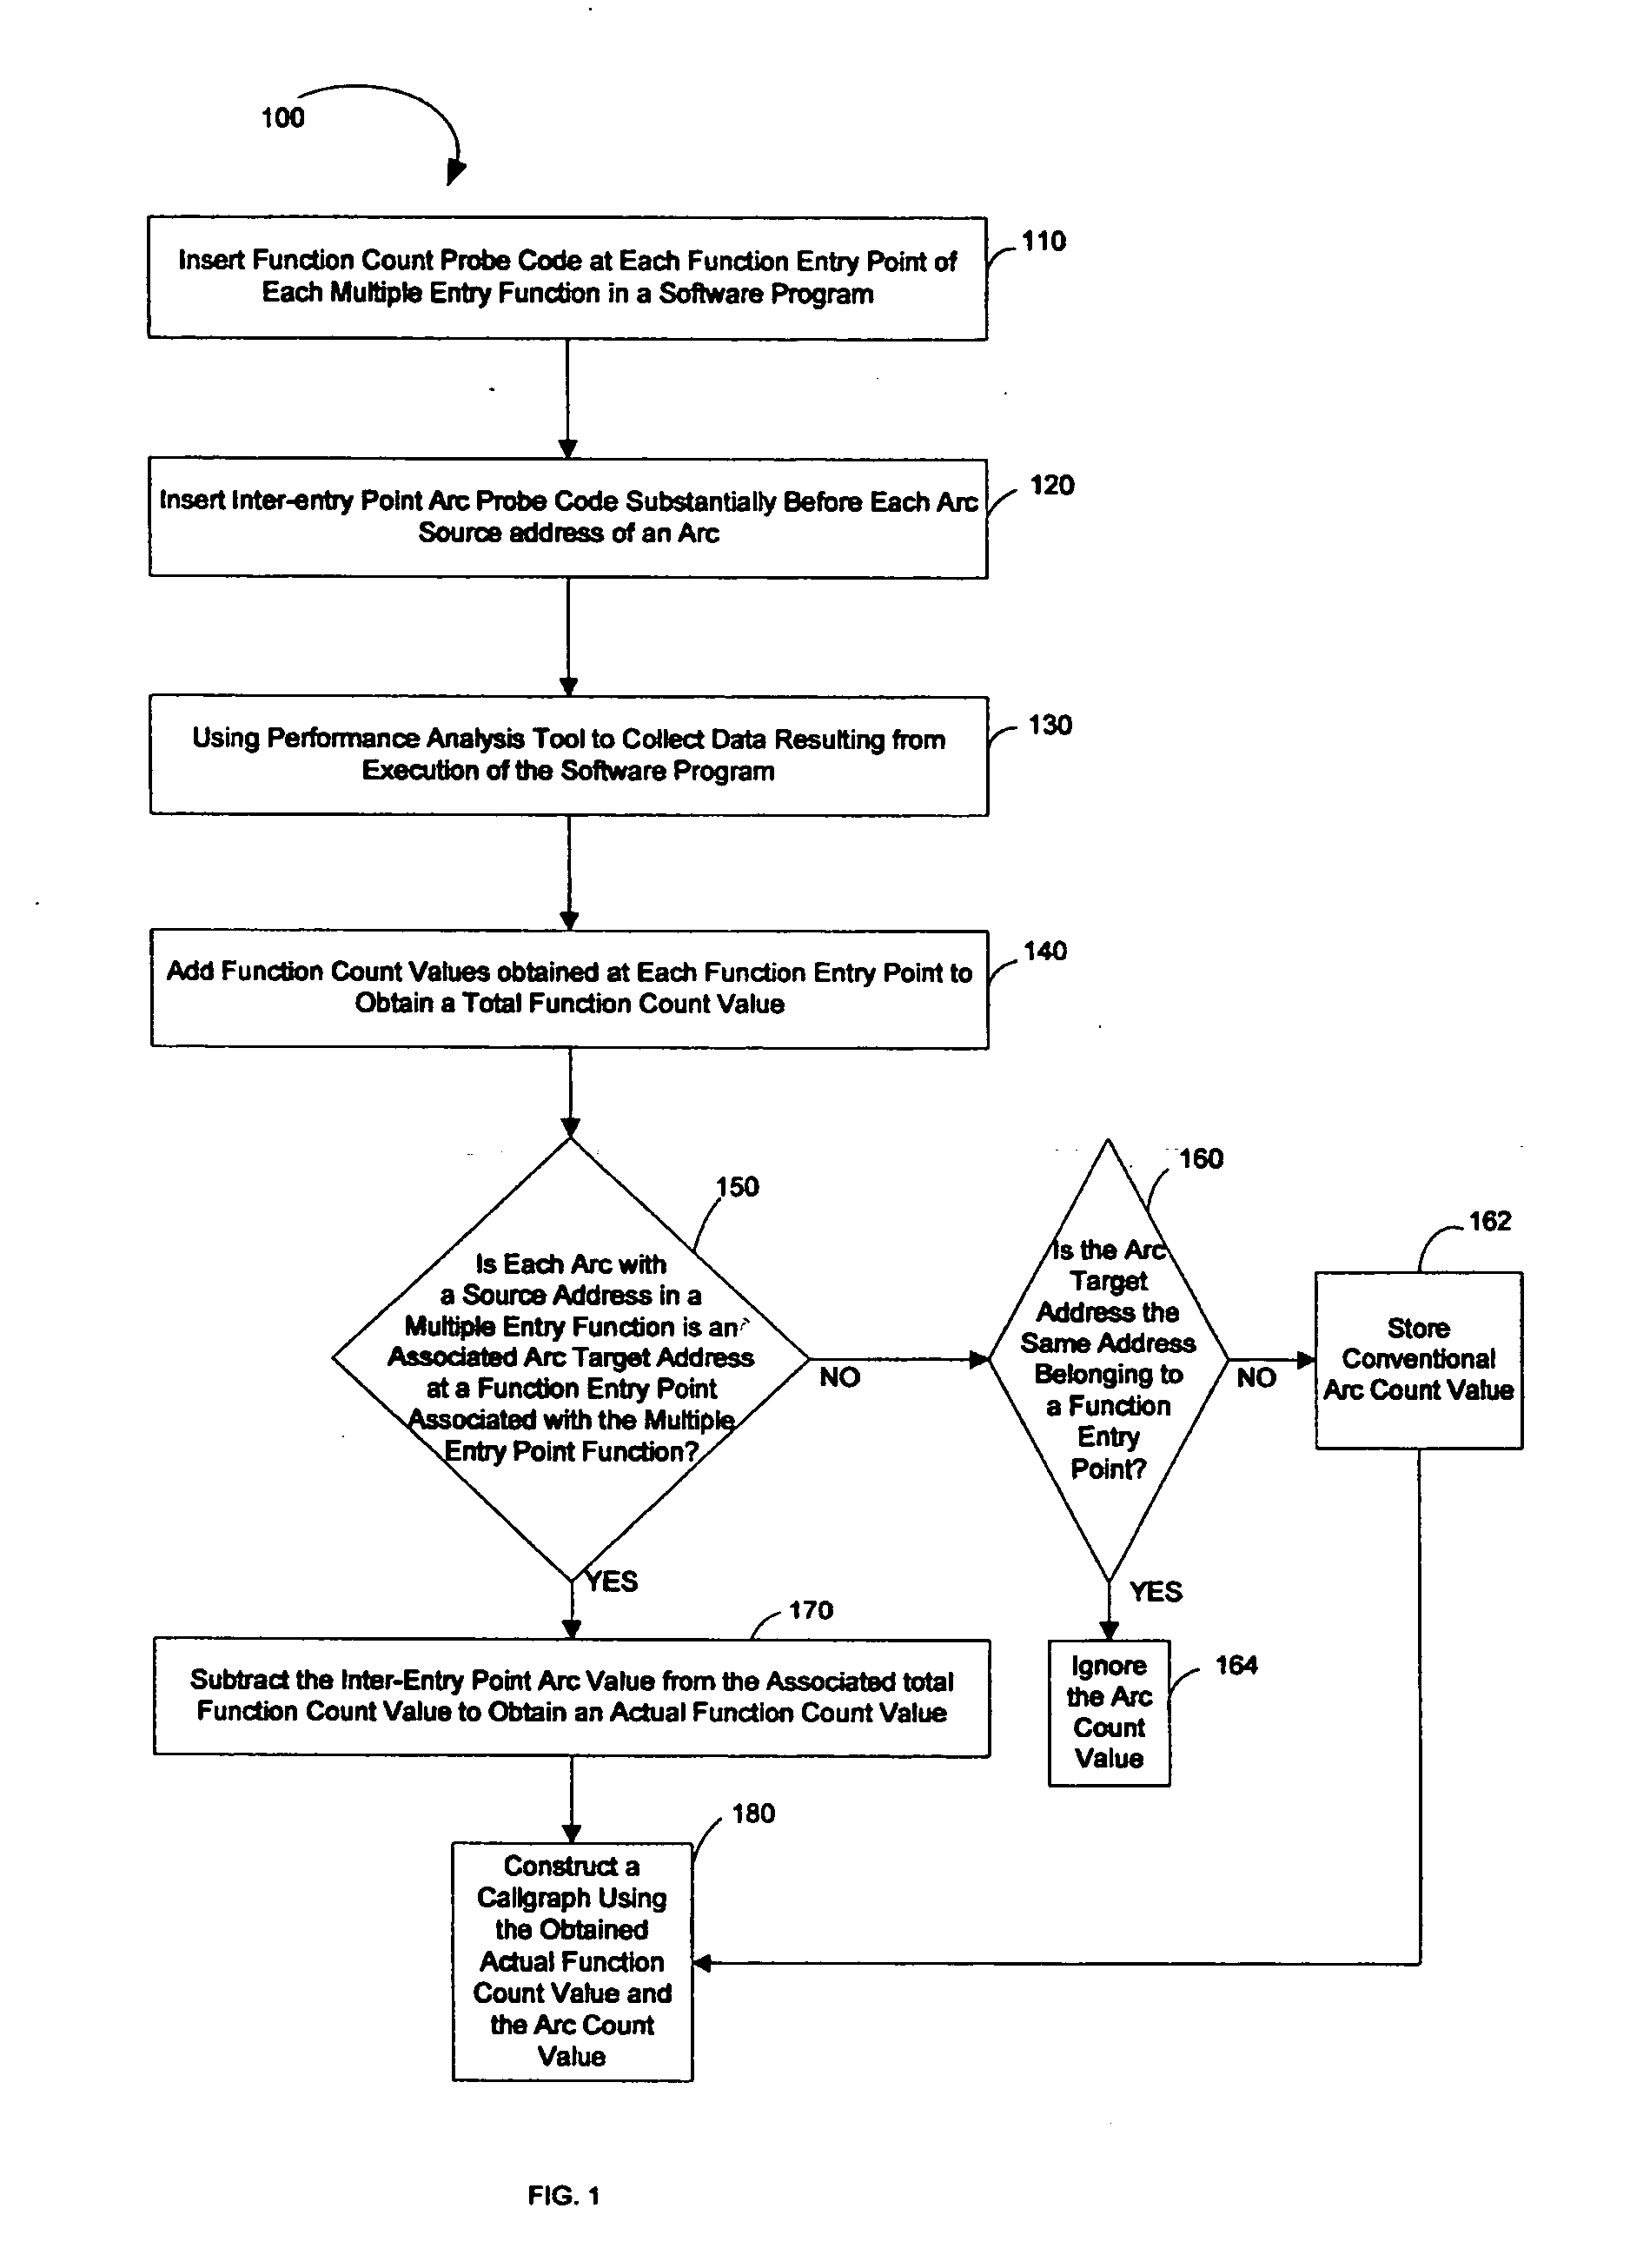 System and method to build a callgraph for functions with multiple entry points